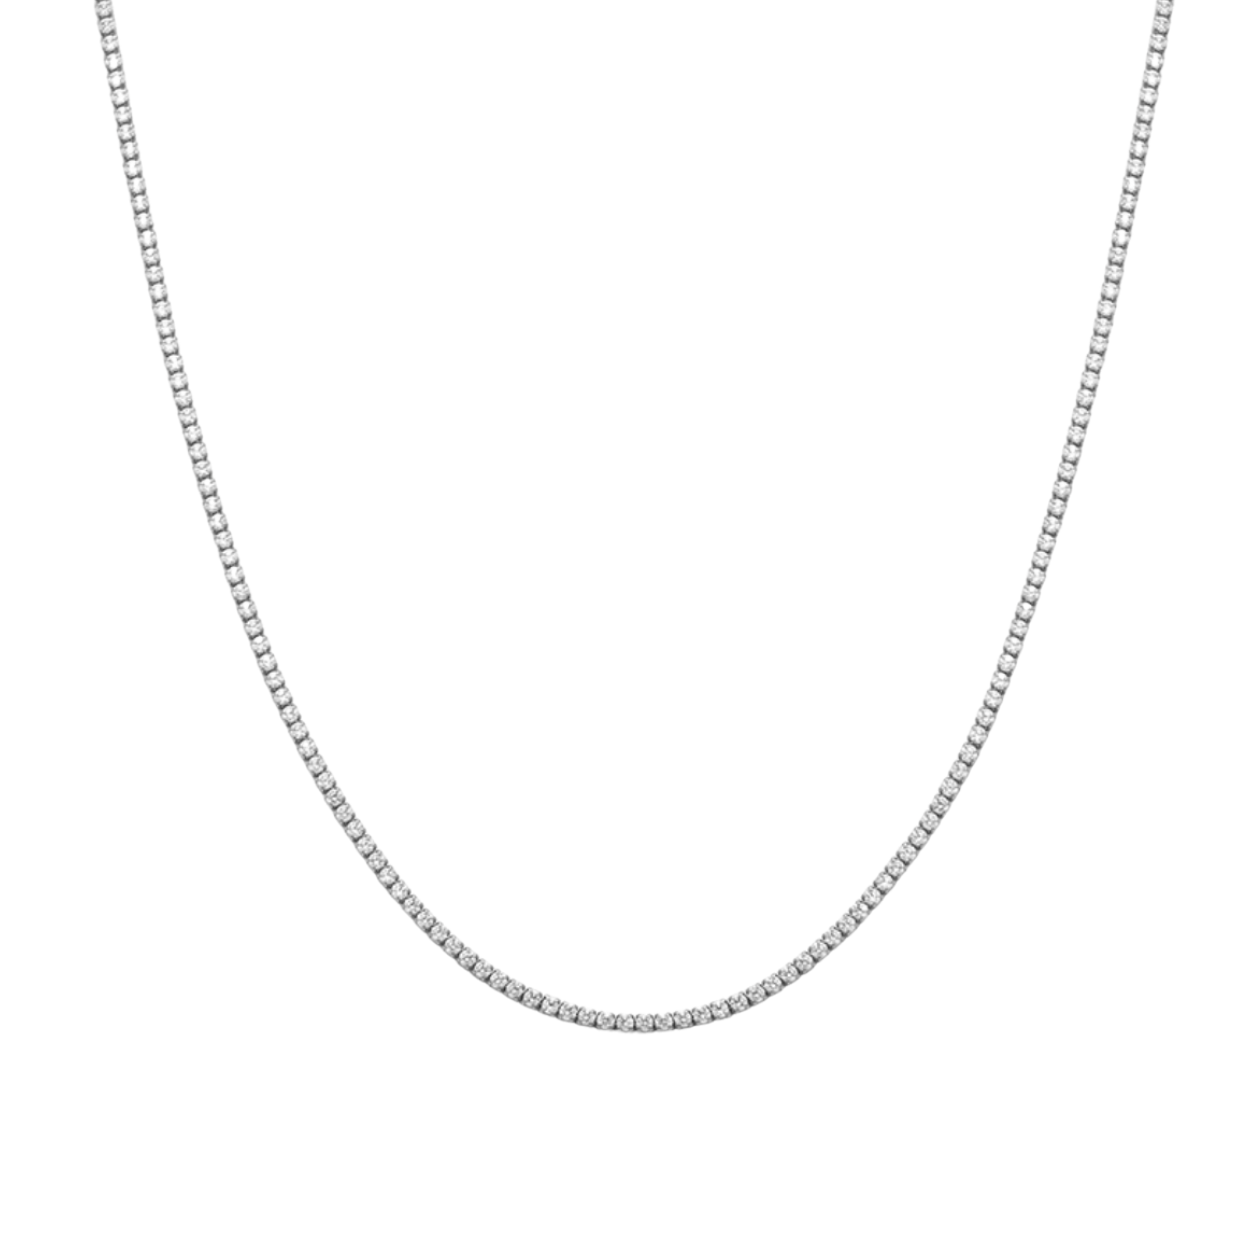 Sterling silver Tiffany necklace with a diamond-shaped pendant